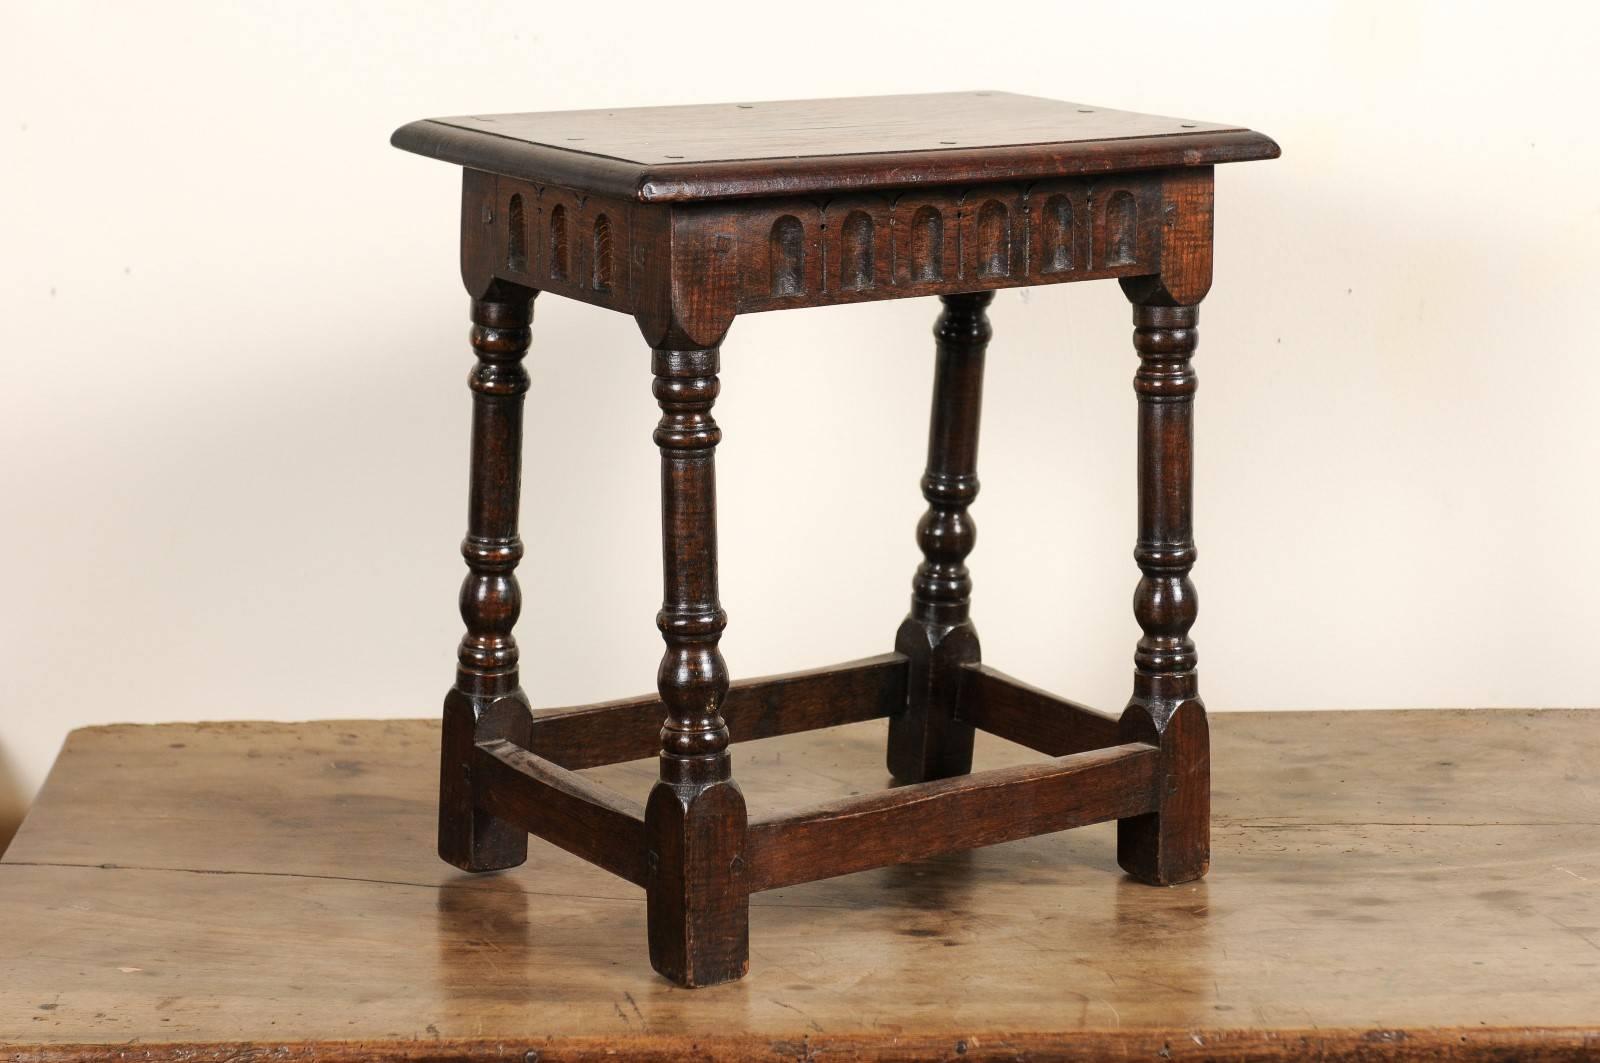 Not only are the turned legs and pegged construction lovely, but the carved Cathedral arches incised on the apron are unusual and decorative. This joint stool has many uses such as a pull up cocktail table or a stool by the fire place.